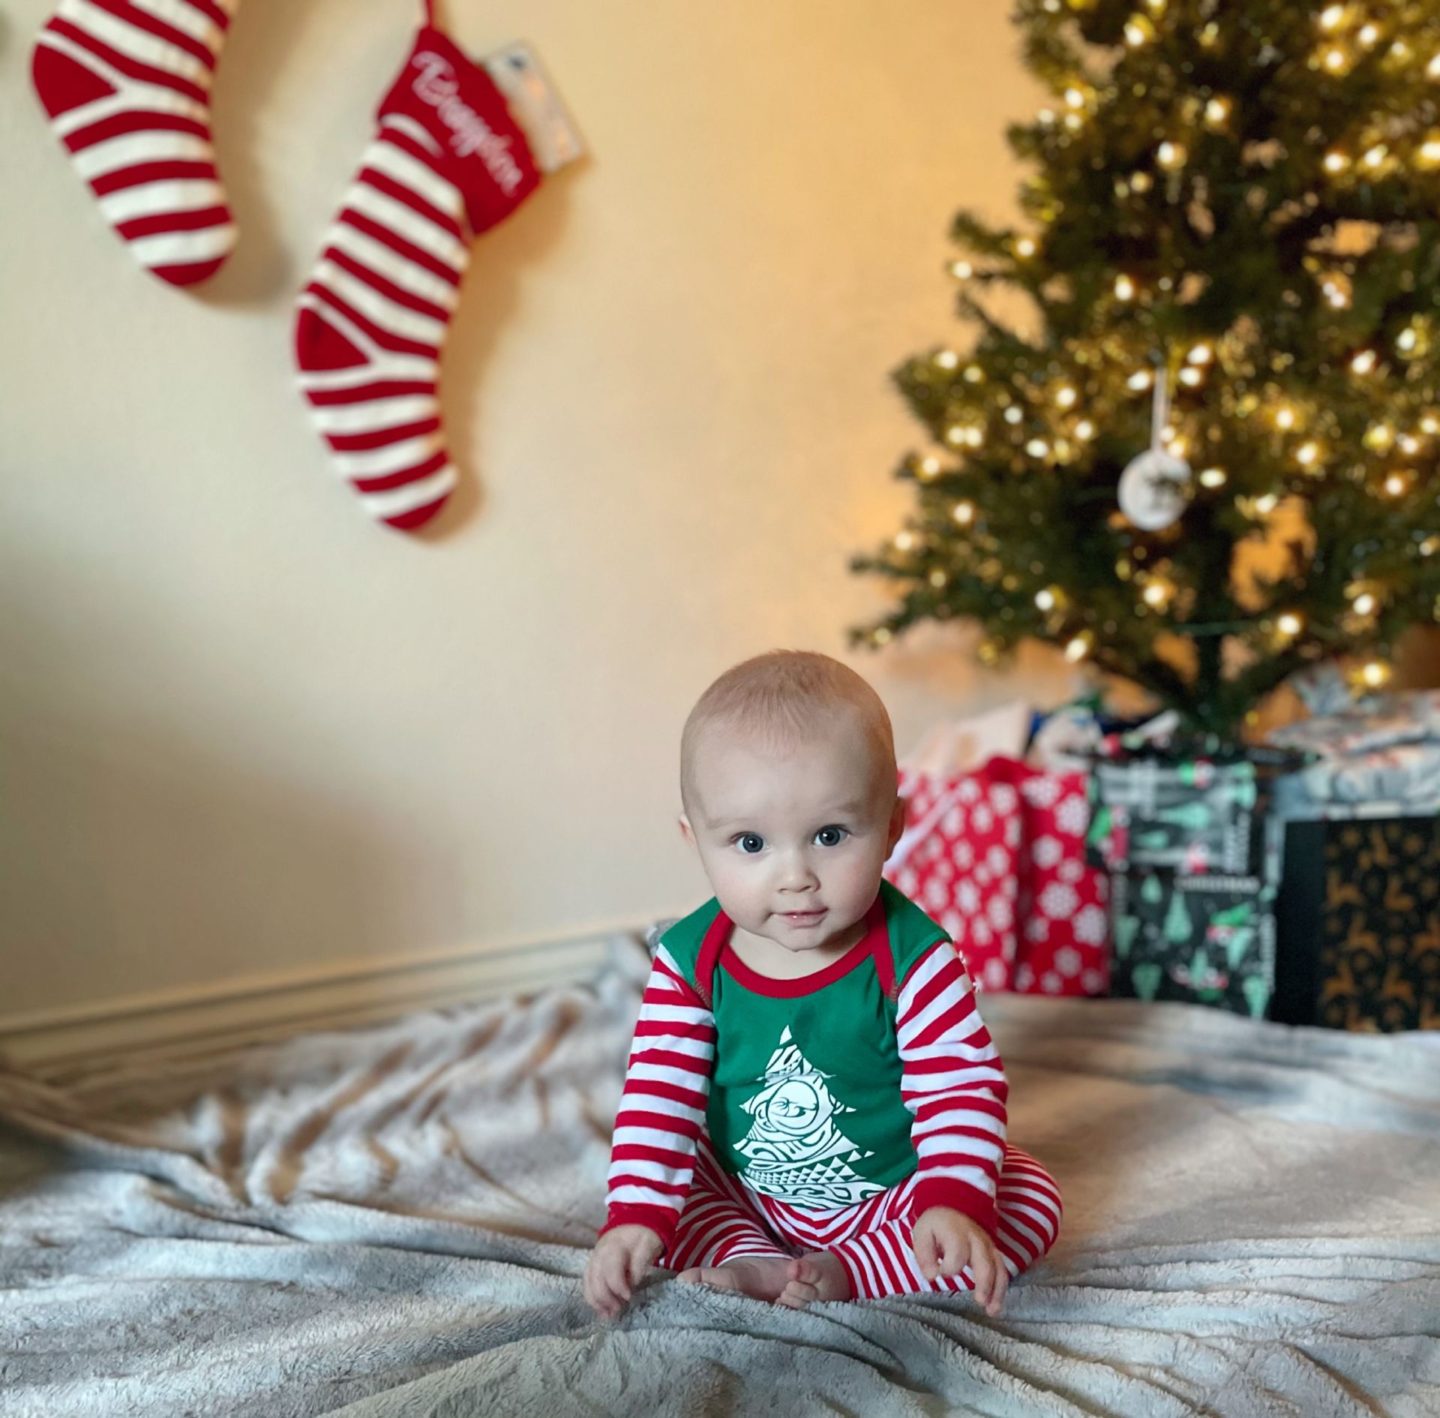 Baby B in christmas pjs by the tree